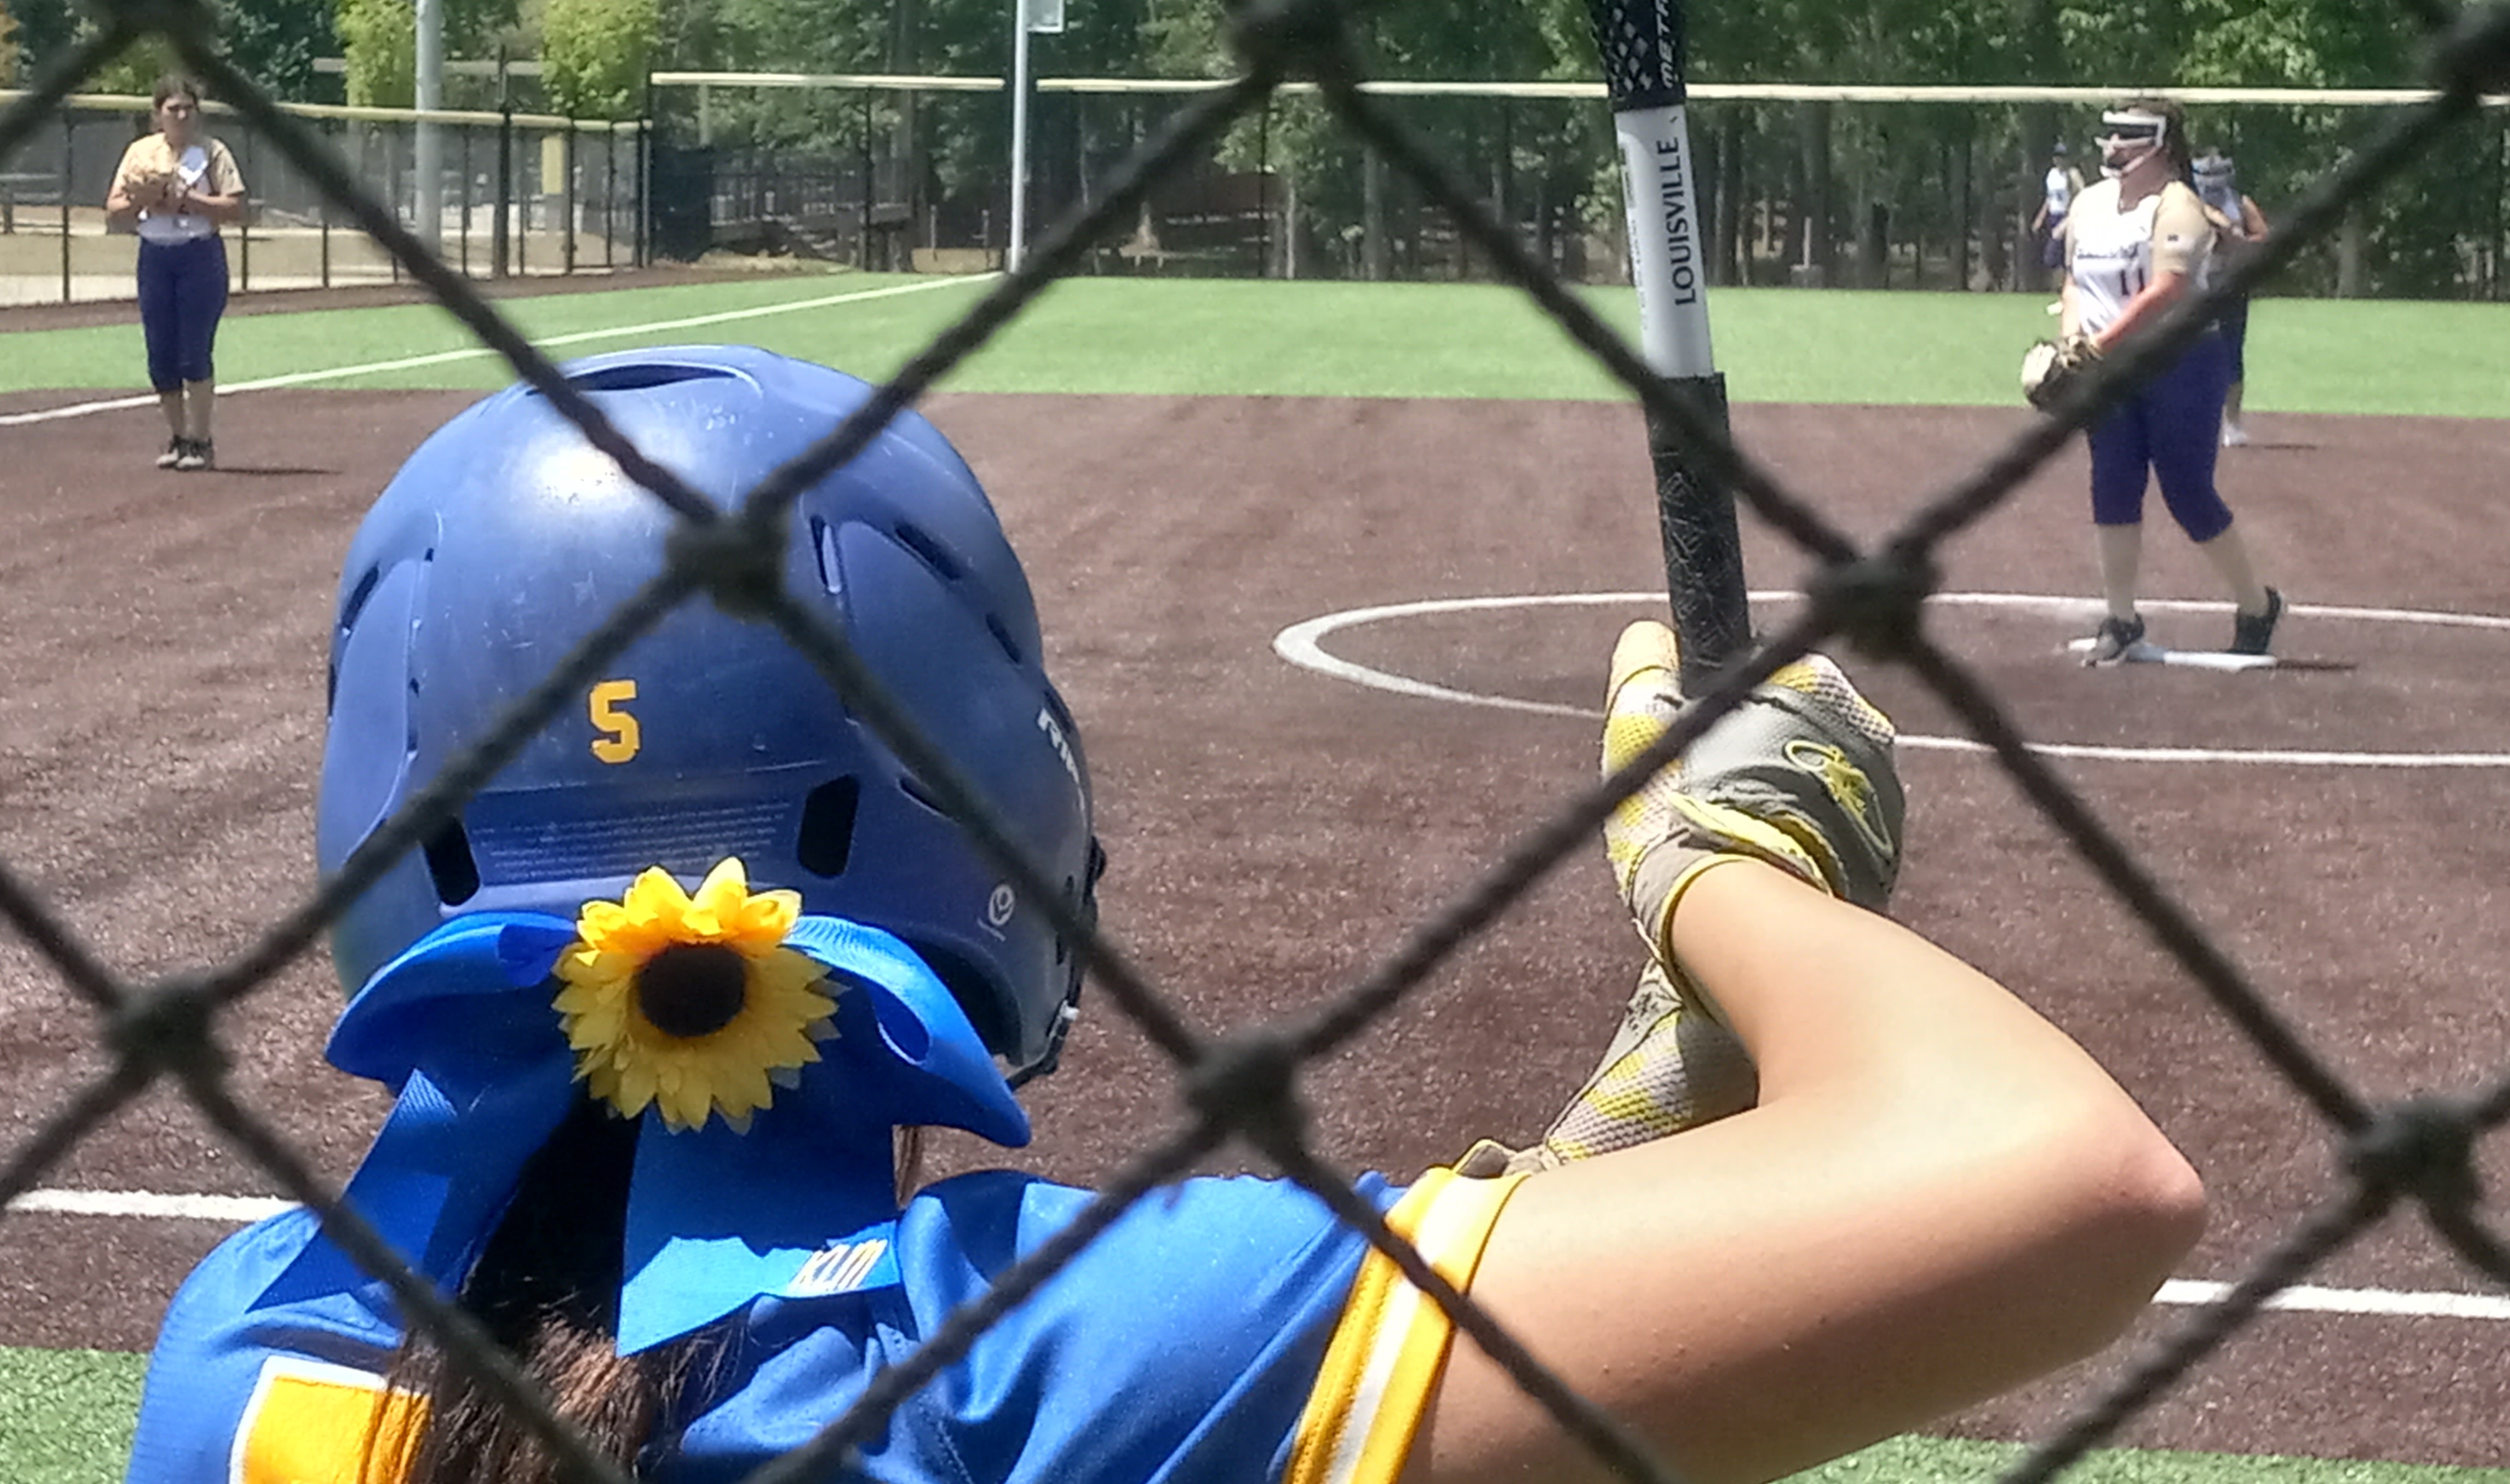 Piedmont players are wearing a special hair bow to honor Jacksonville State softball coach Jana McGinnis’ late daughter, Kinsey, who died last weekend after living 26 years with a rare genetic disorder. (Photo by Joe Medley)